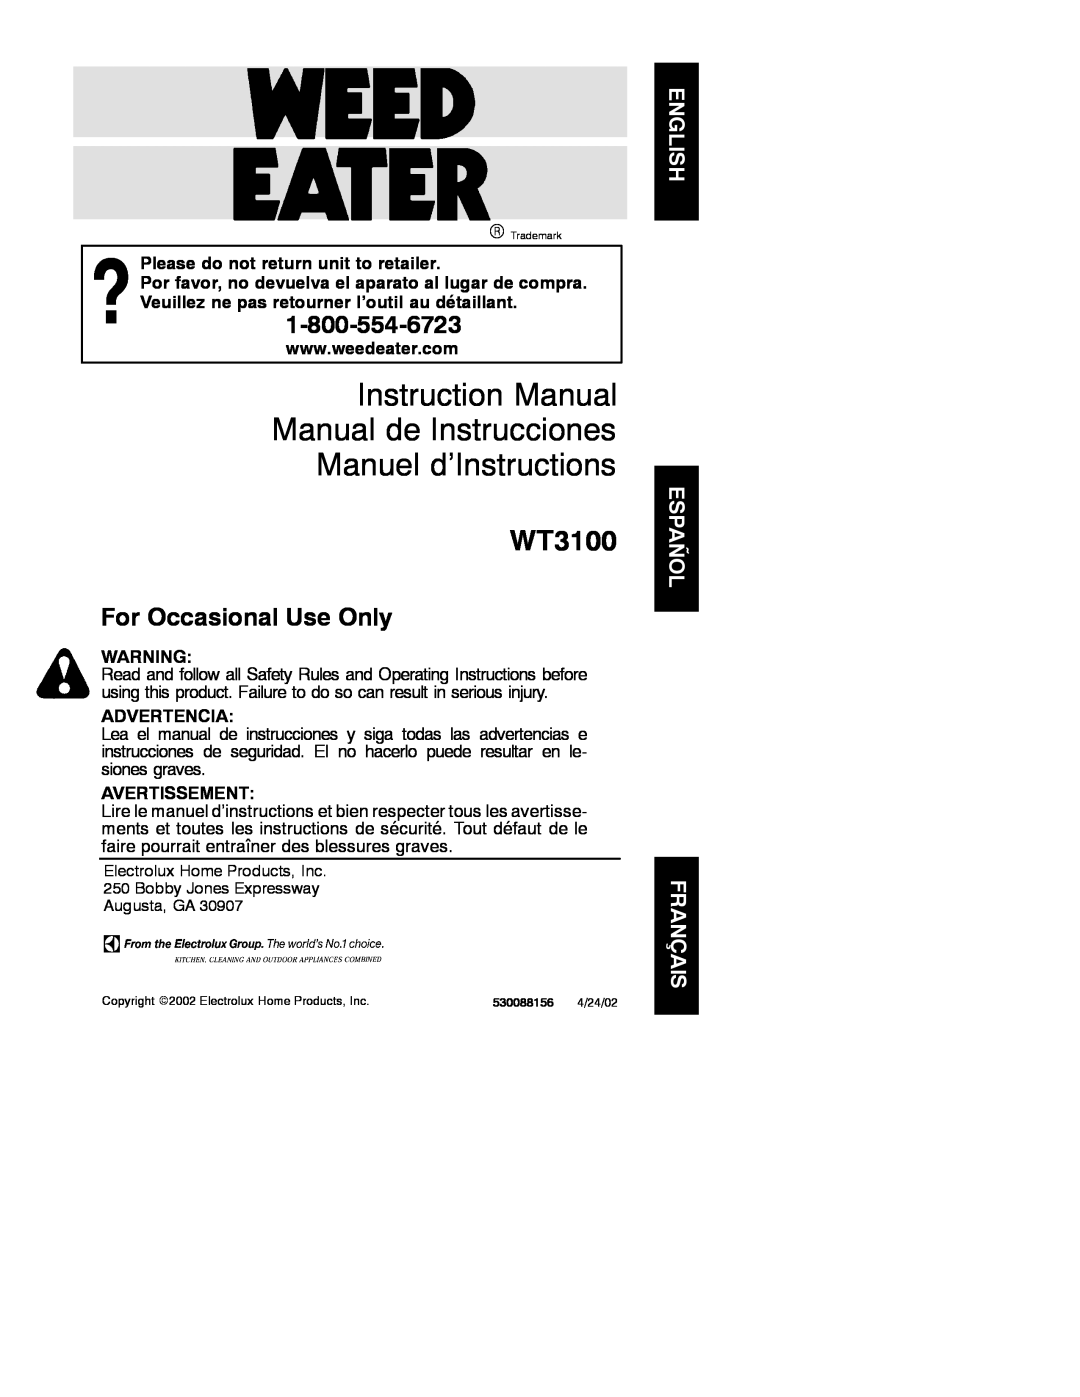 Weed Eater 530088156, WT300 instruction manual Please do not return unit to retailer, Advertencia, Avertissement, WT3100 